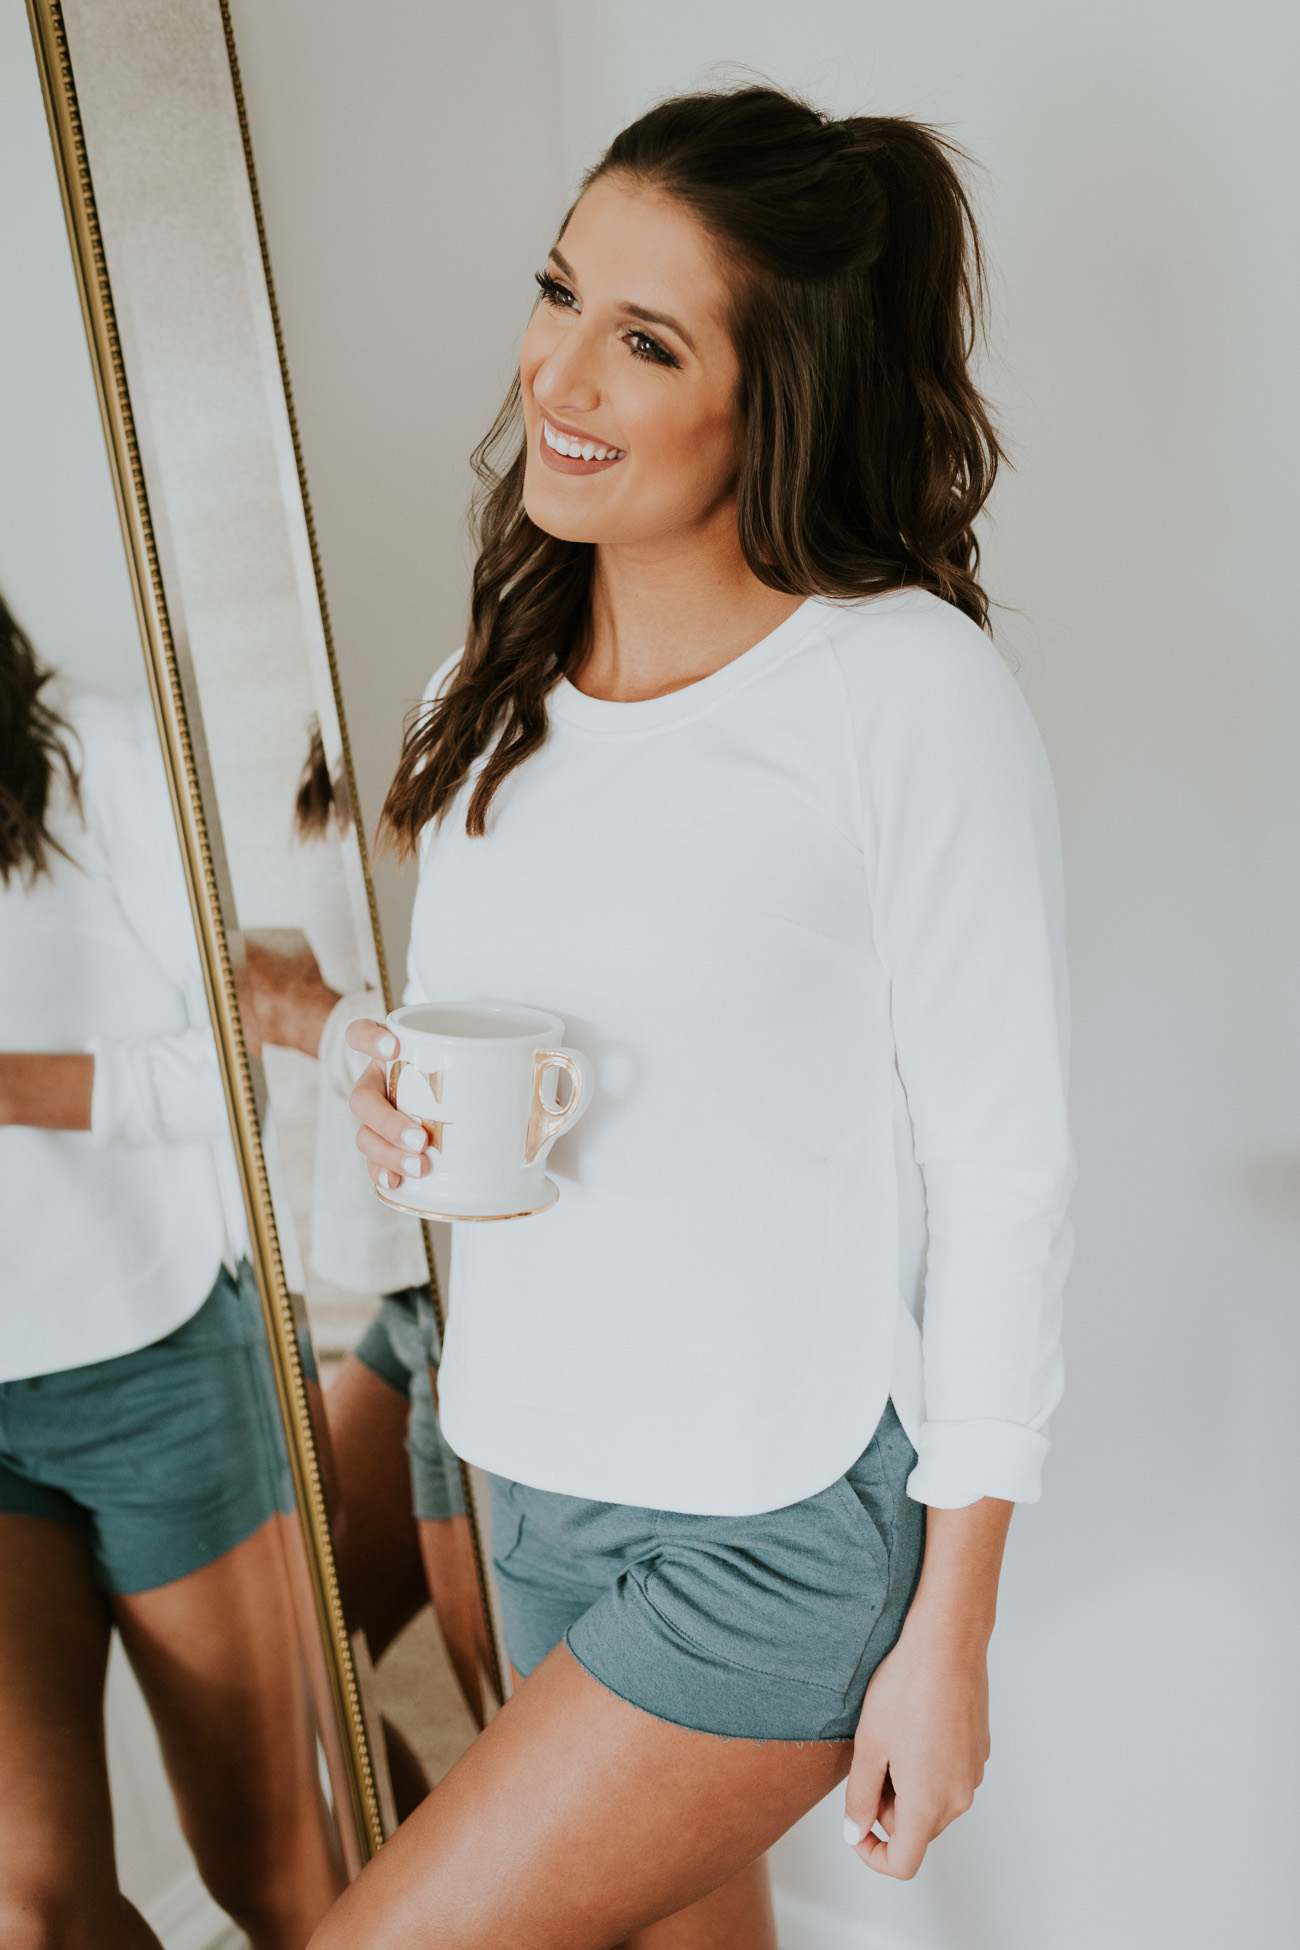 2018 labor day sales, labor day sale, labor day weekend, labor day shopping, labor day fashion, cozy style, cozy loungewear, loungewear outfit, best sales for labor day, best labor day sales // grace wainwright grace white a southern drawl